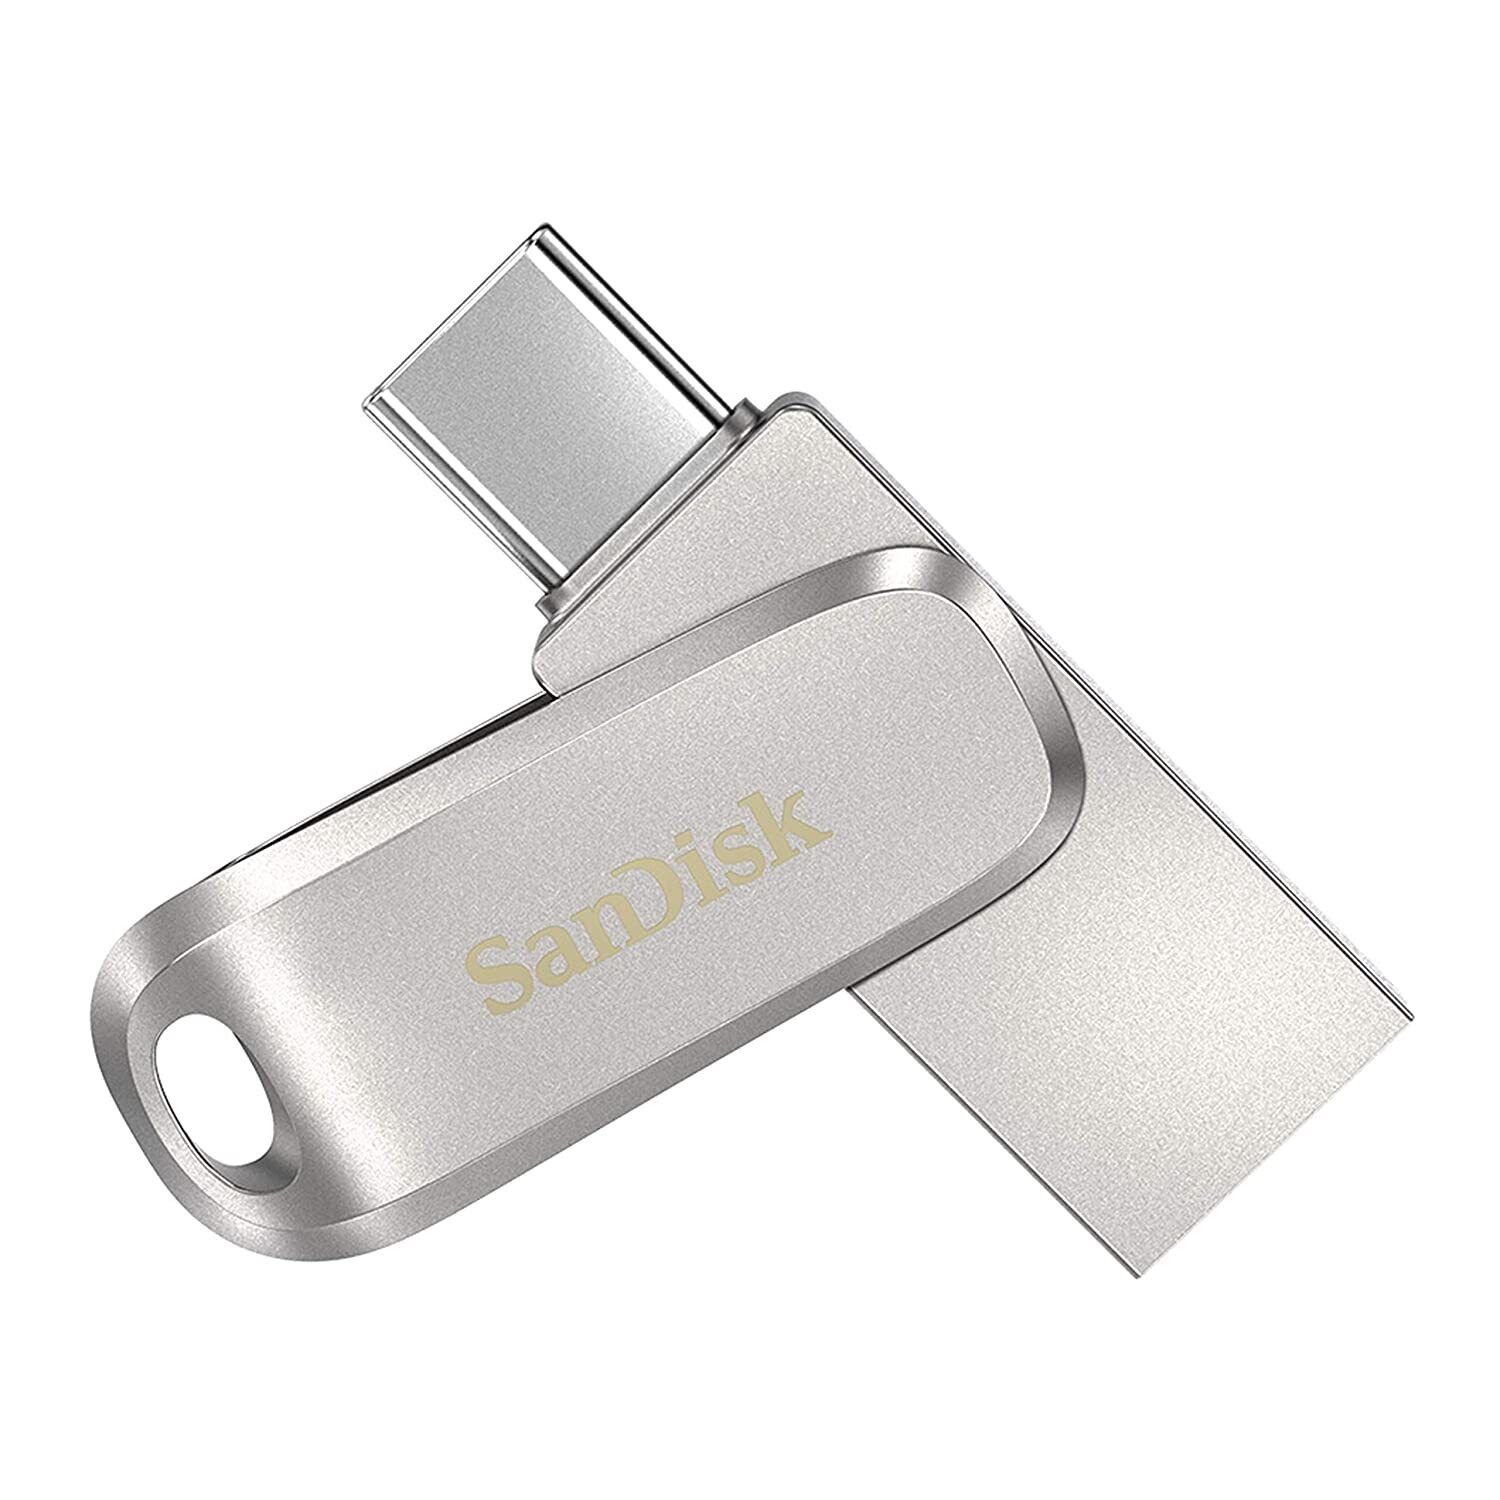 SanDisk 128GB Dual Drive Luxe USB Type-C Pen Drive for mobile